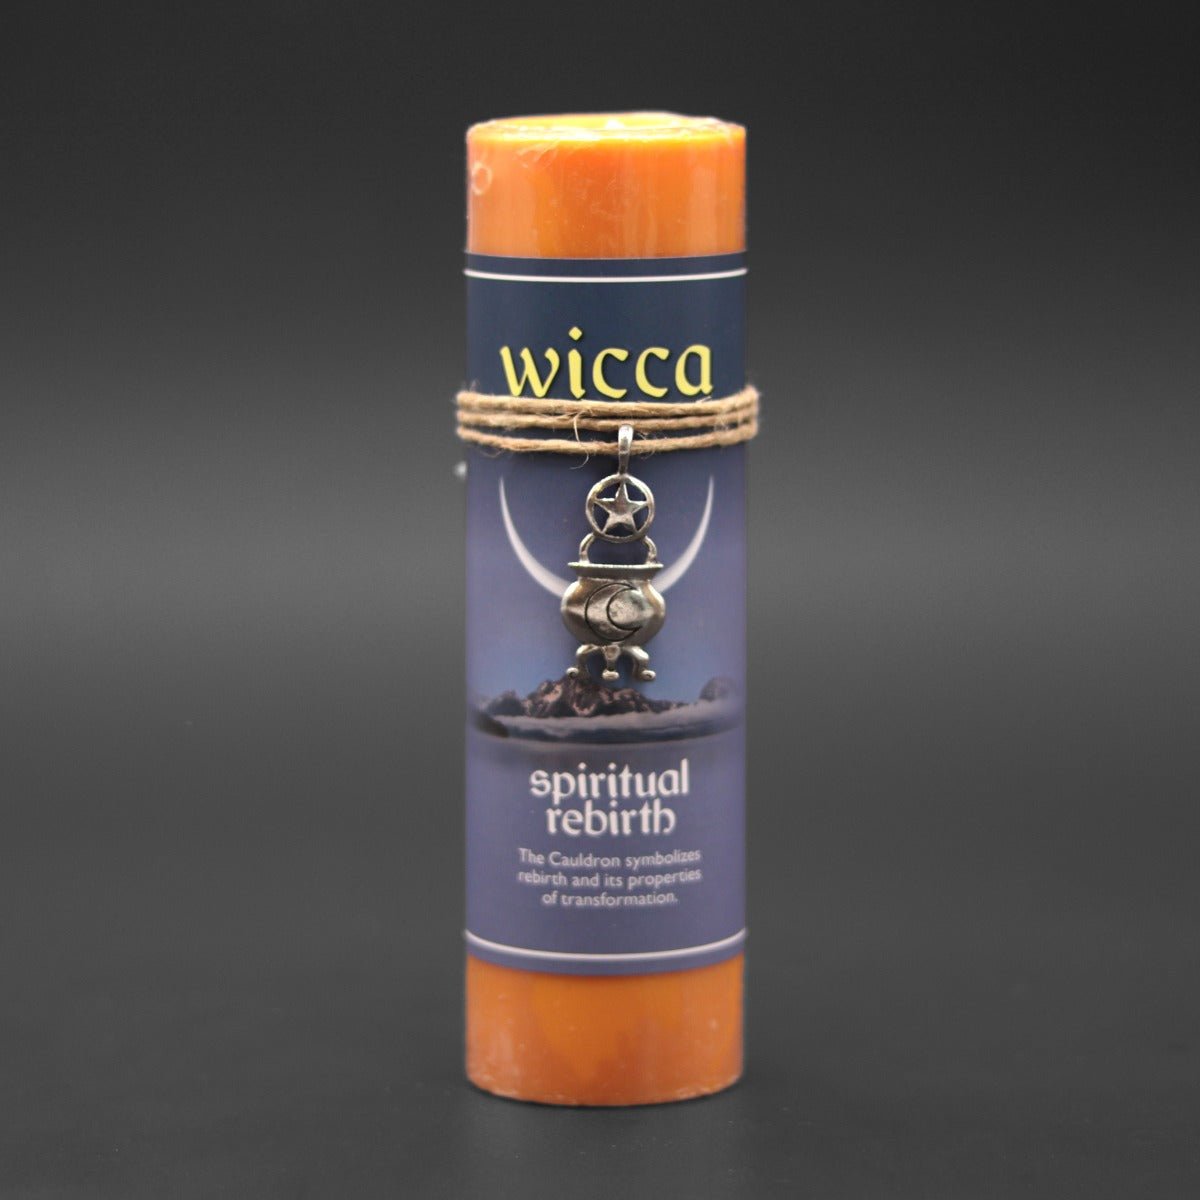 Wicca Spiritual Rebirth Candle with Pendant - 13 Moons